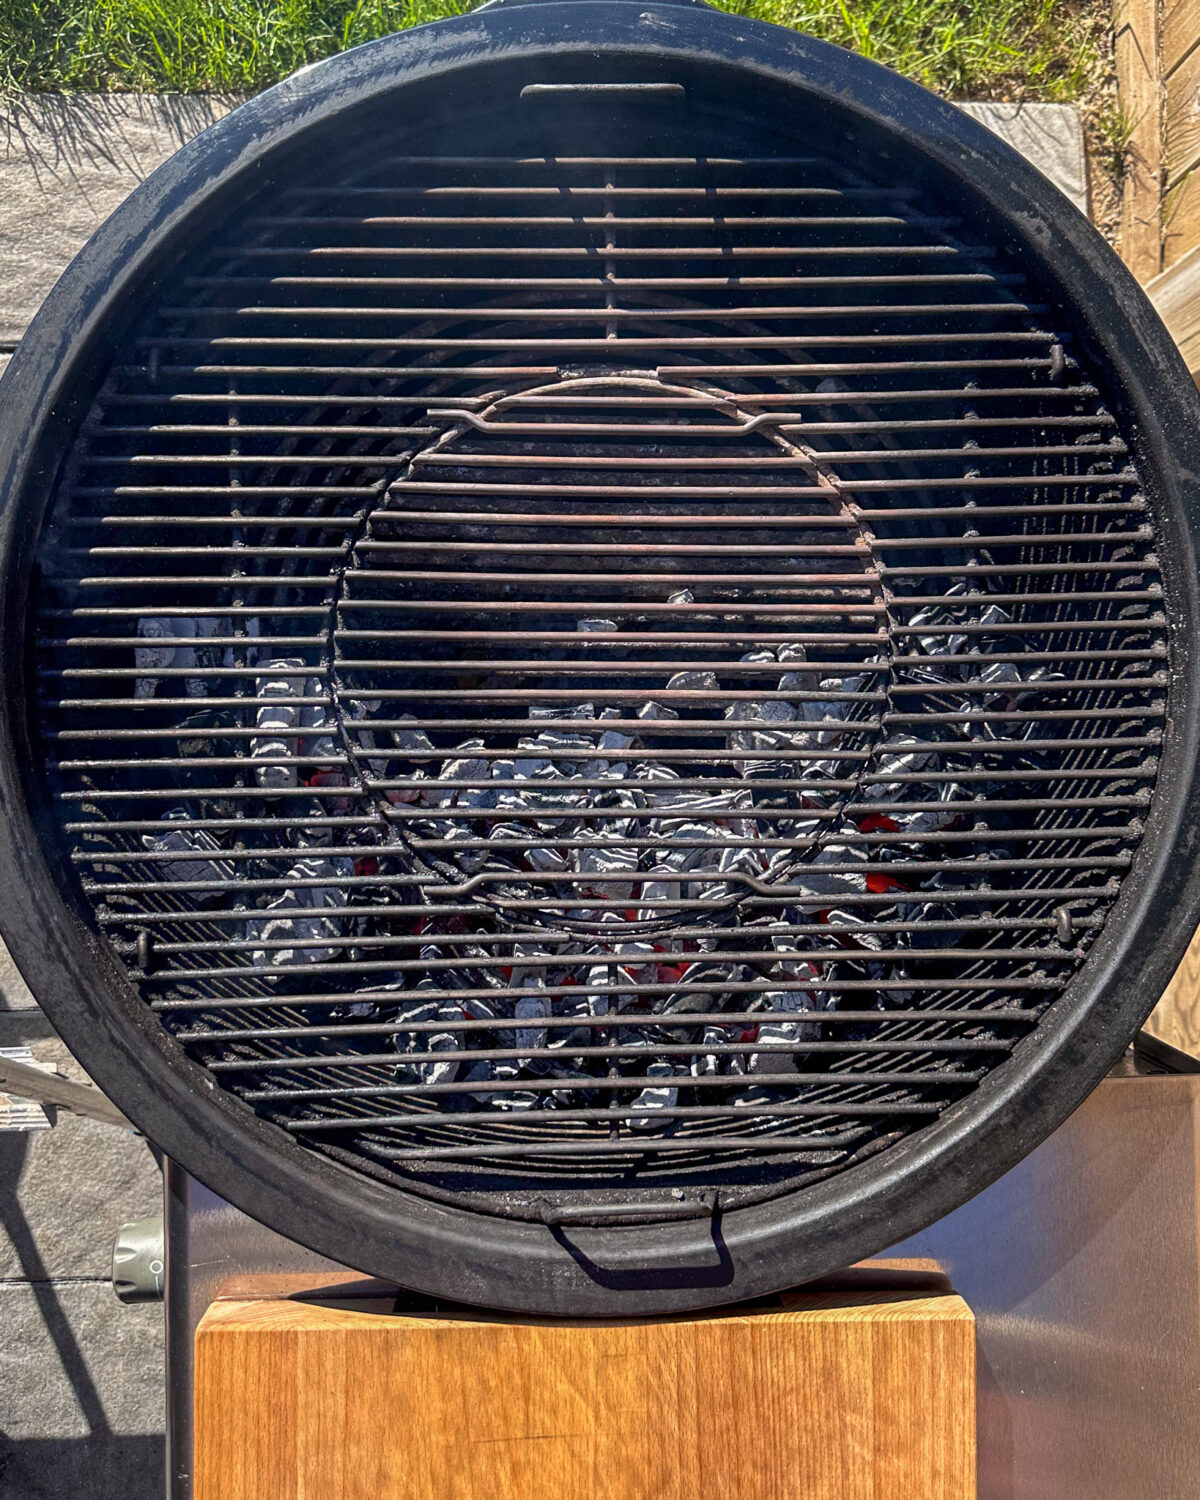 For charcoal grills, light the charcoal and let it burn until covered with white ash, then spread the coals evenly over half the grill. 